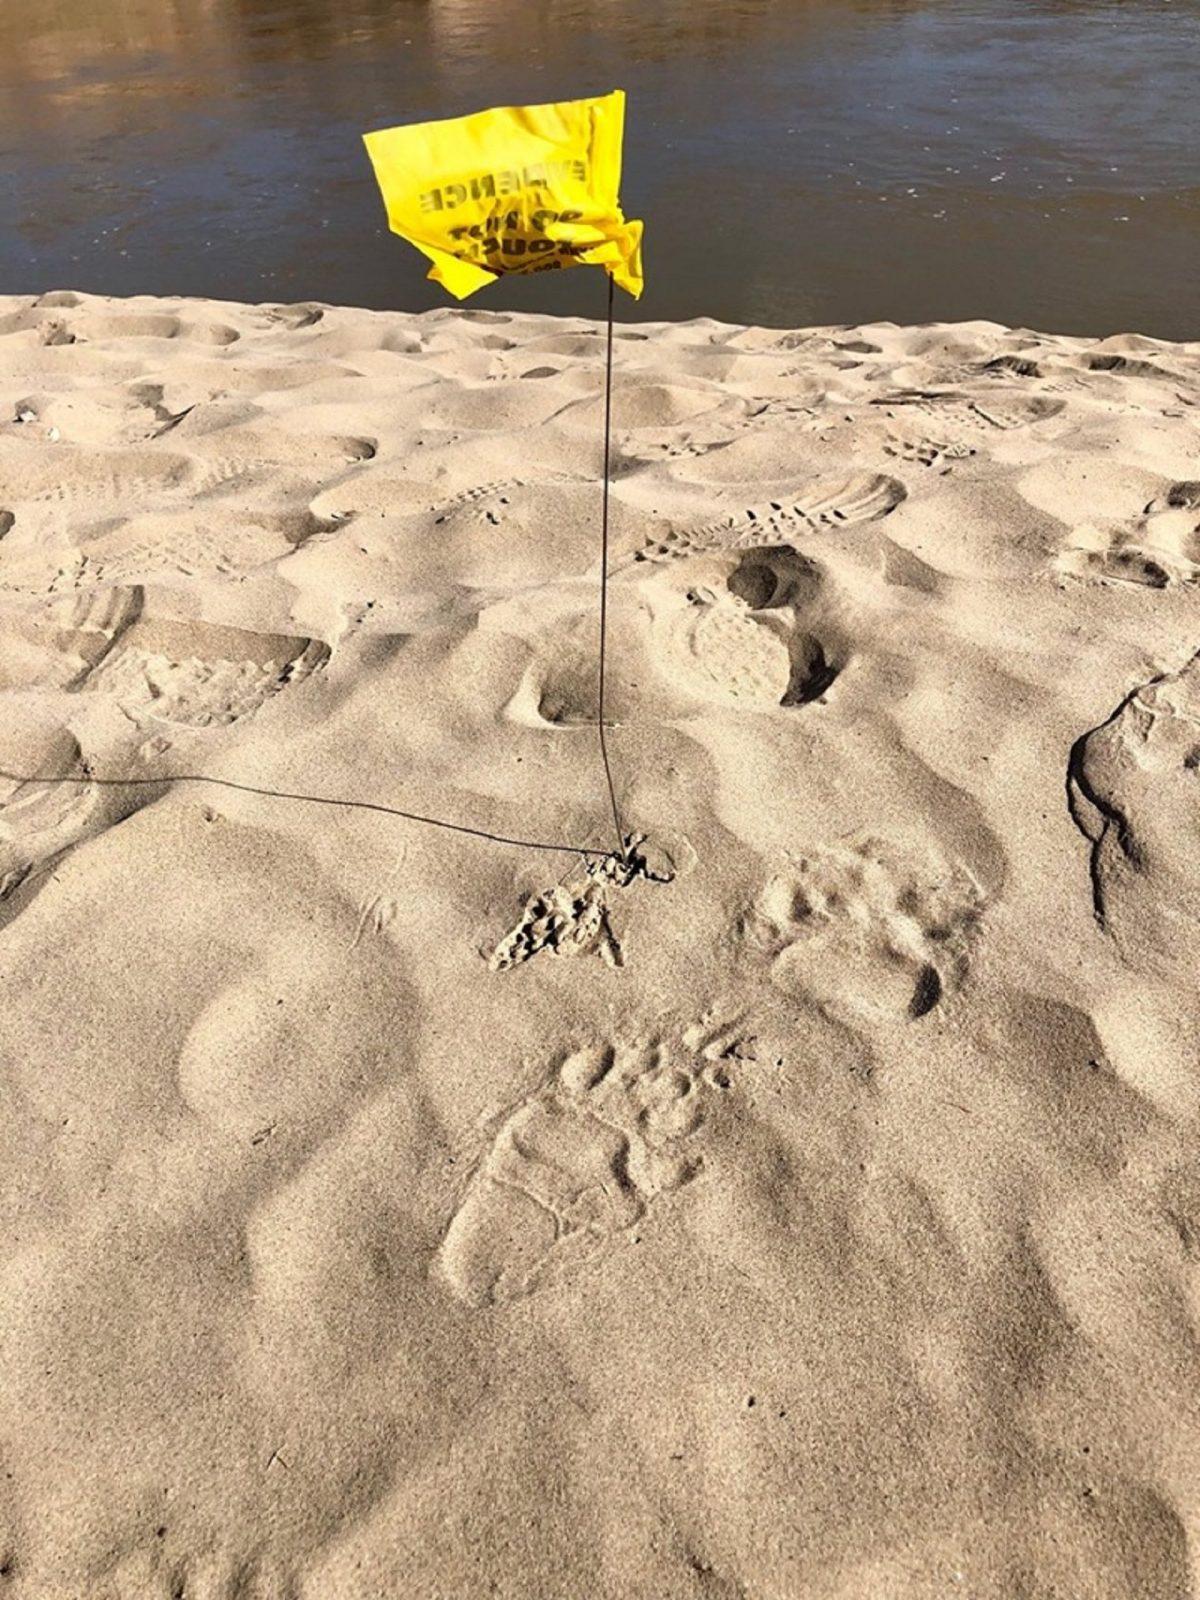 Utah Division of Wildlife Resources officials said they found the bear's tracks in the sand along the river. (Utah Division of Wildlife Resources/Twitter)